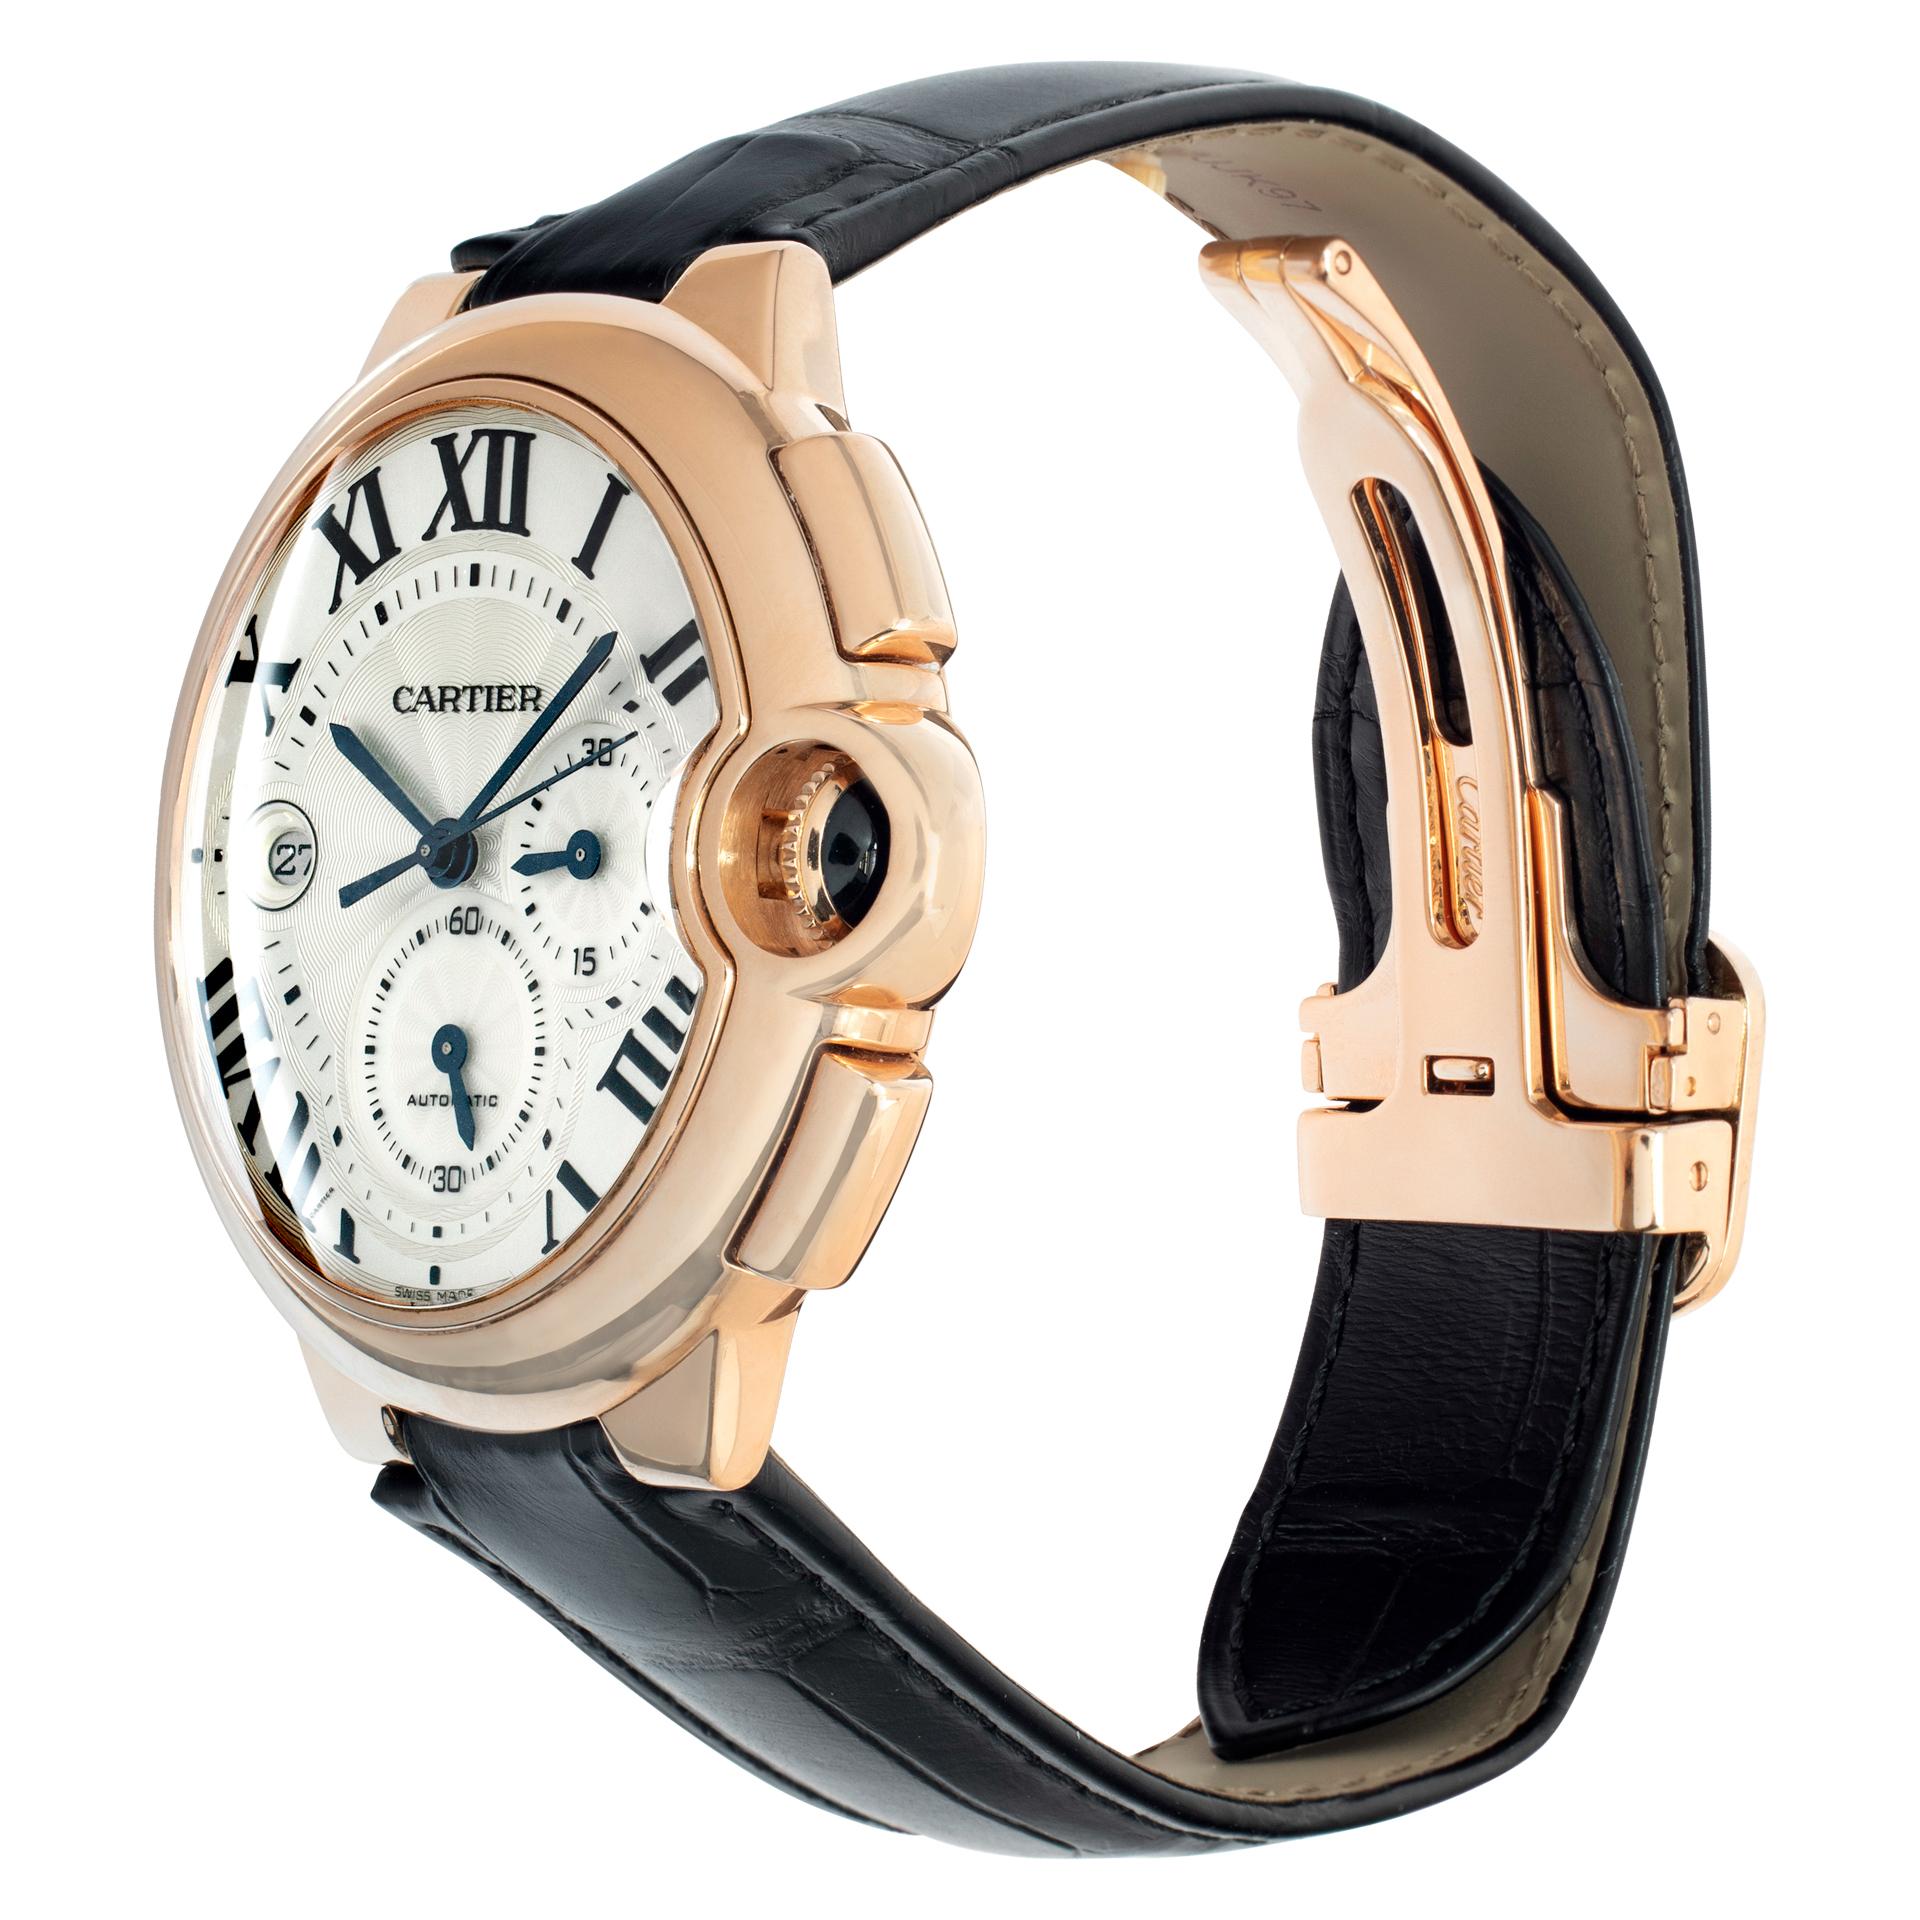 Cartier Ballon Bleu XL Chronograph in 18k rose gold on a black leather strap with 18k rose gold deployant buckle. Automatic movement under glass w/ date and chronograph and sweep seconds. 44 mm case size. With box. Ref W6920009. Fine Pre-owned